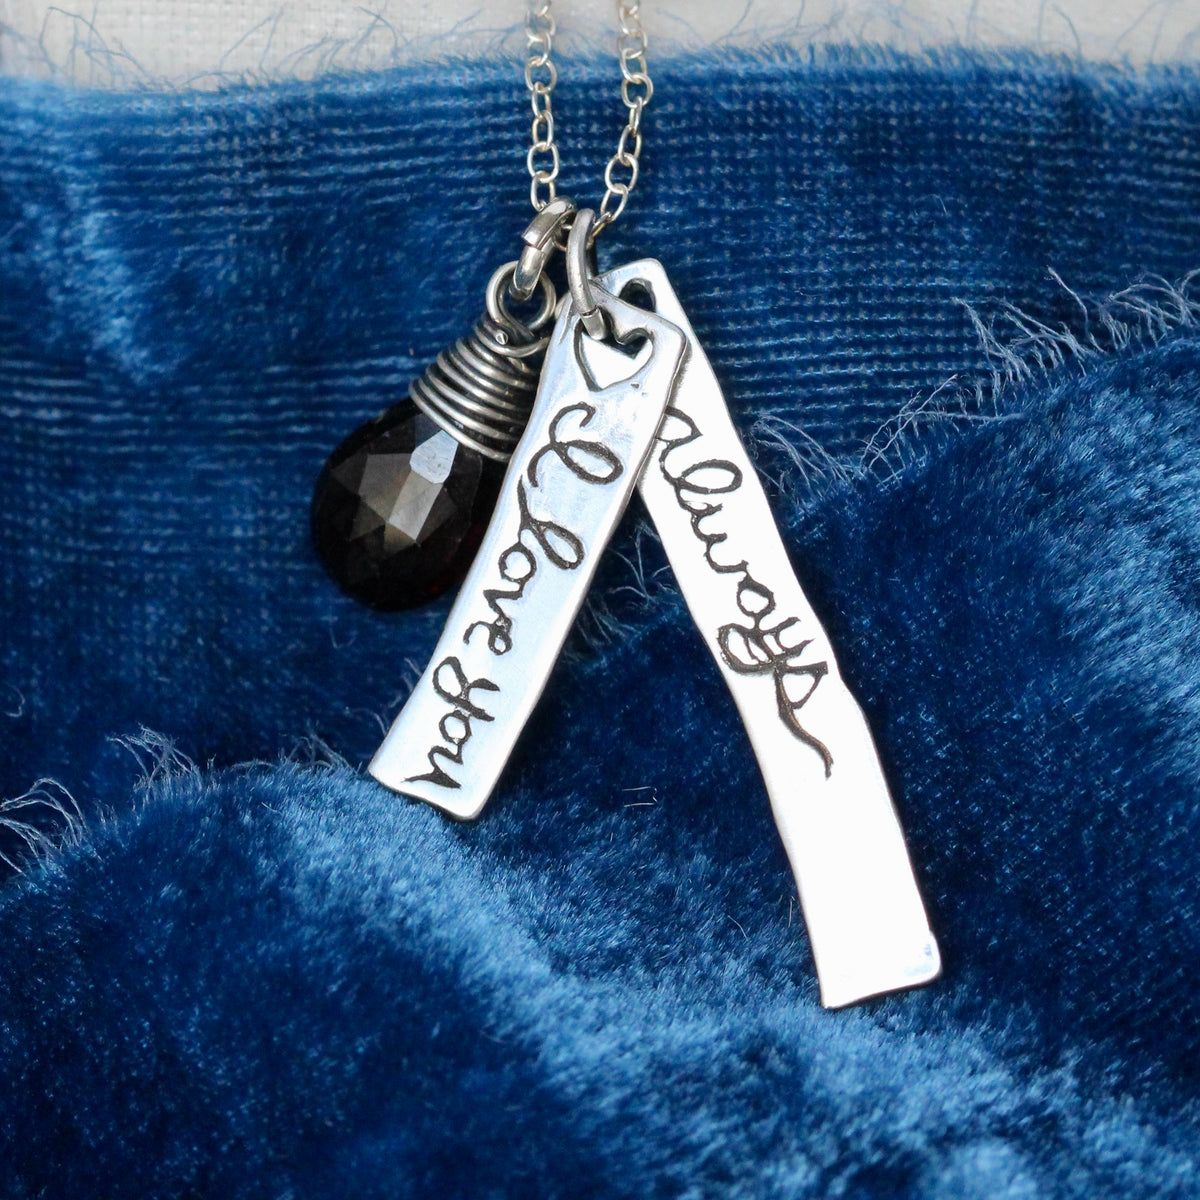 I Love You Always sterling silver necklace